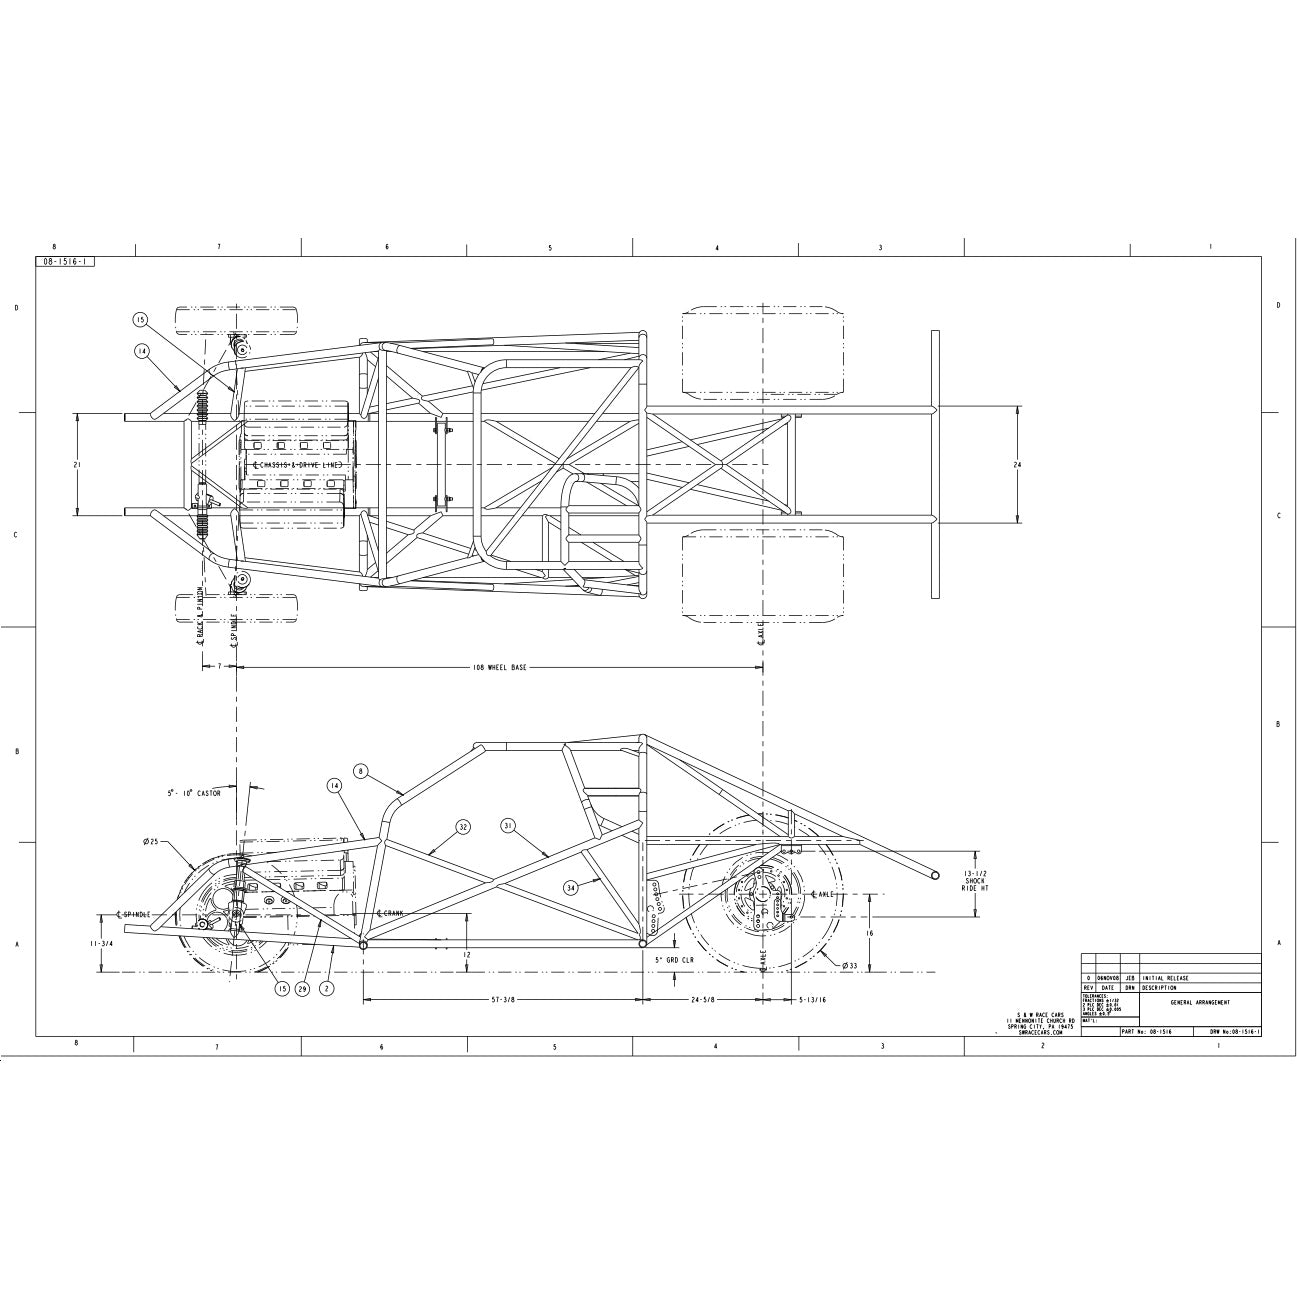 1955-1957 Chevrolet Chevy Tube Chassis Blueprint